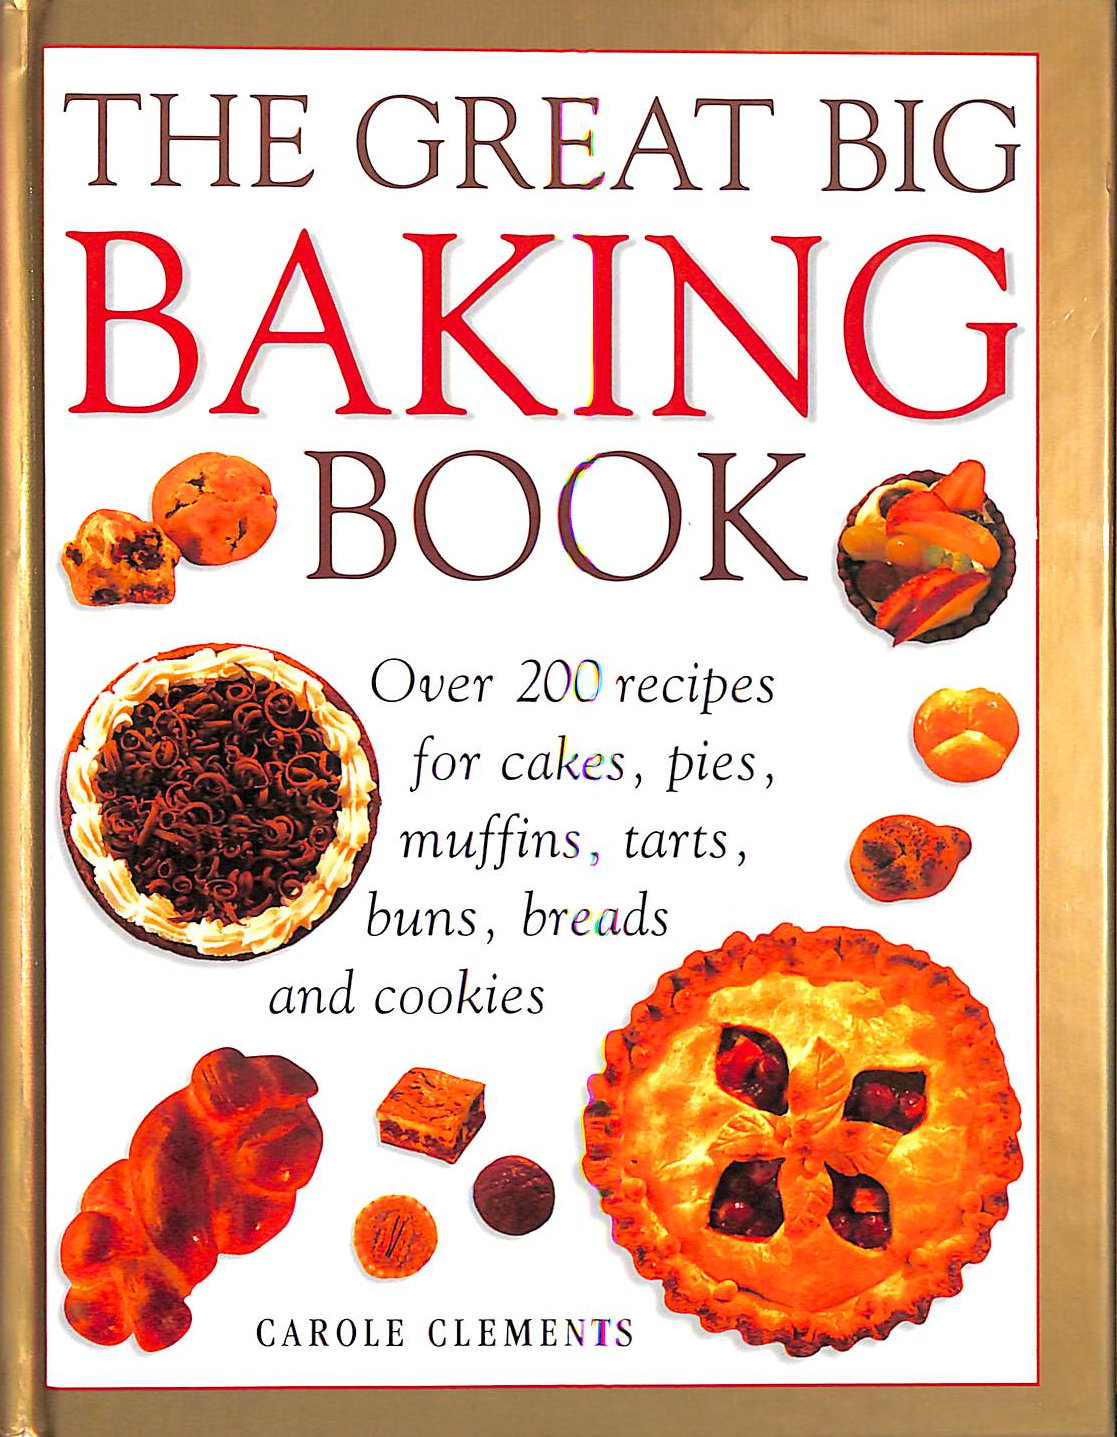 C CLEMENTS - The Great Big Baking Book